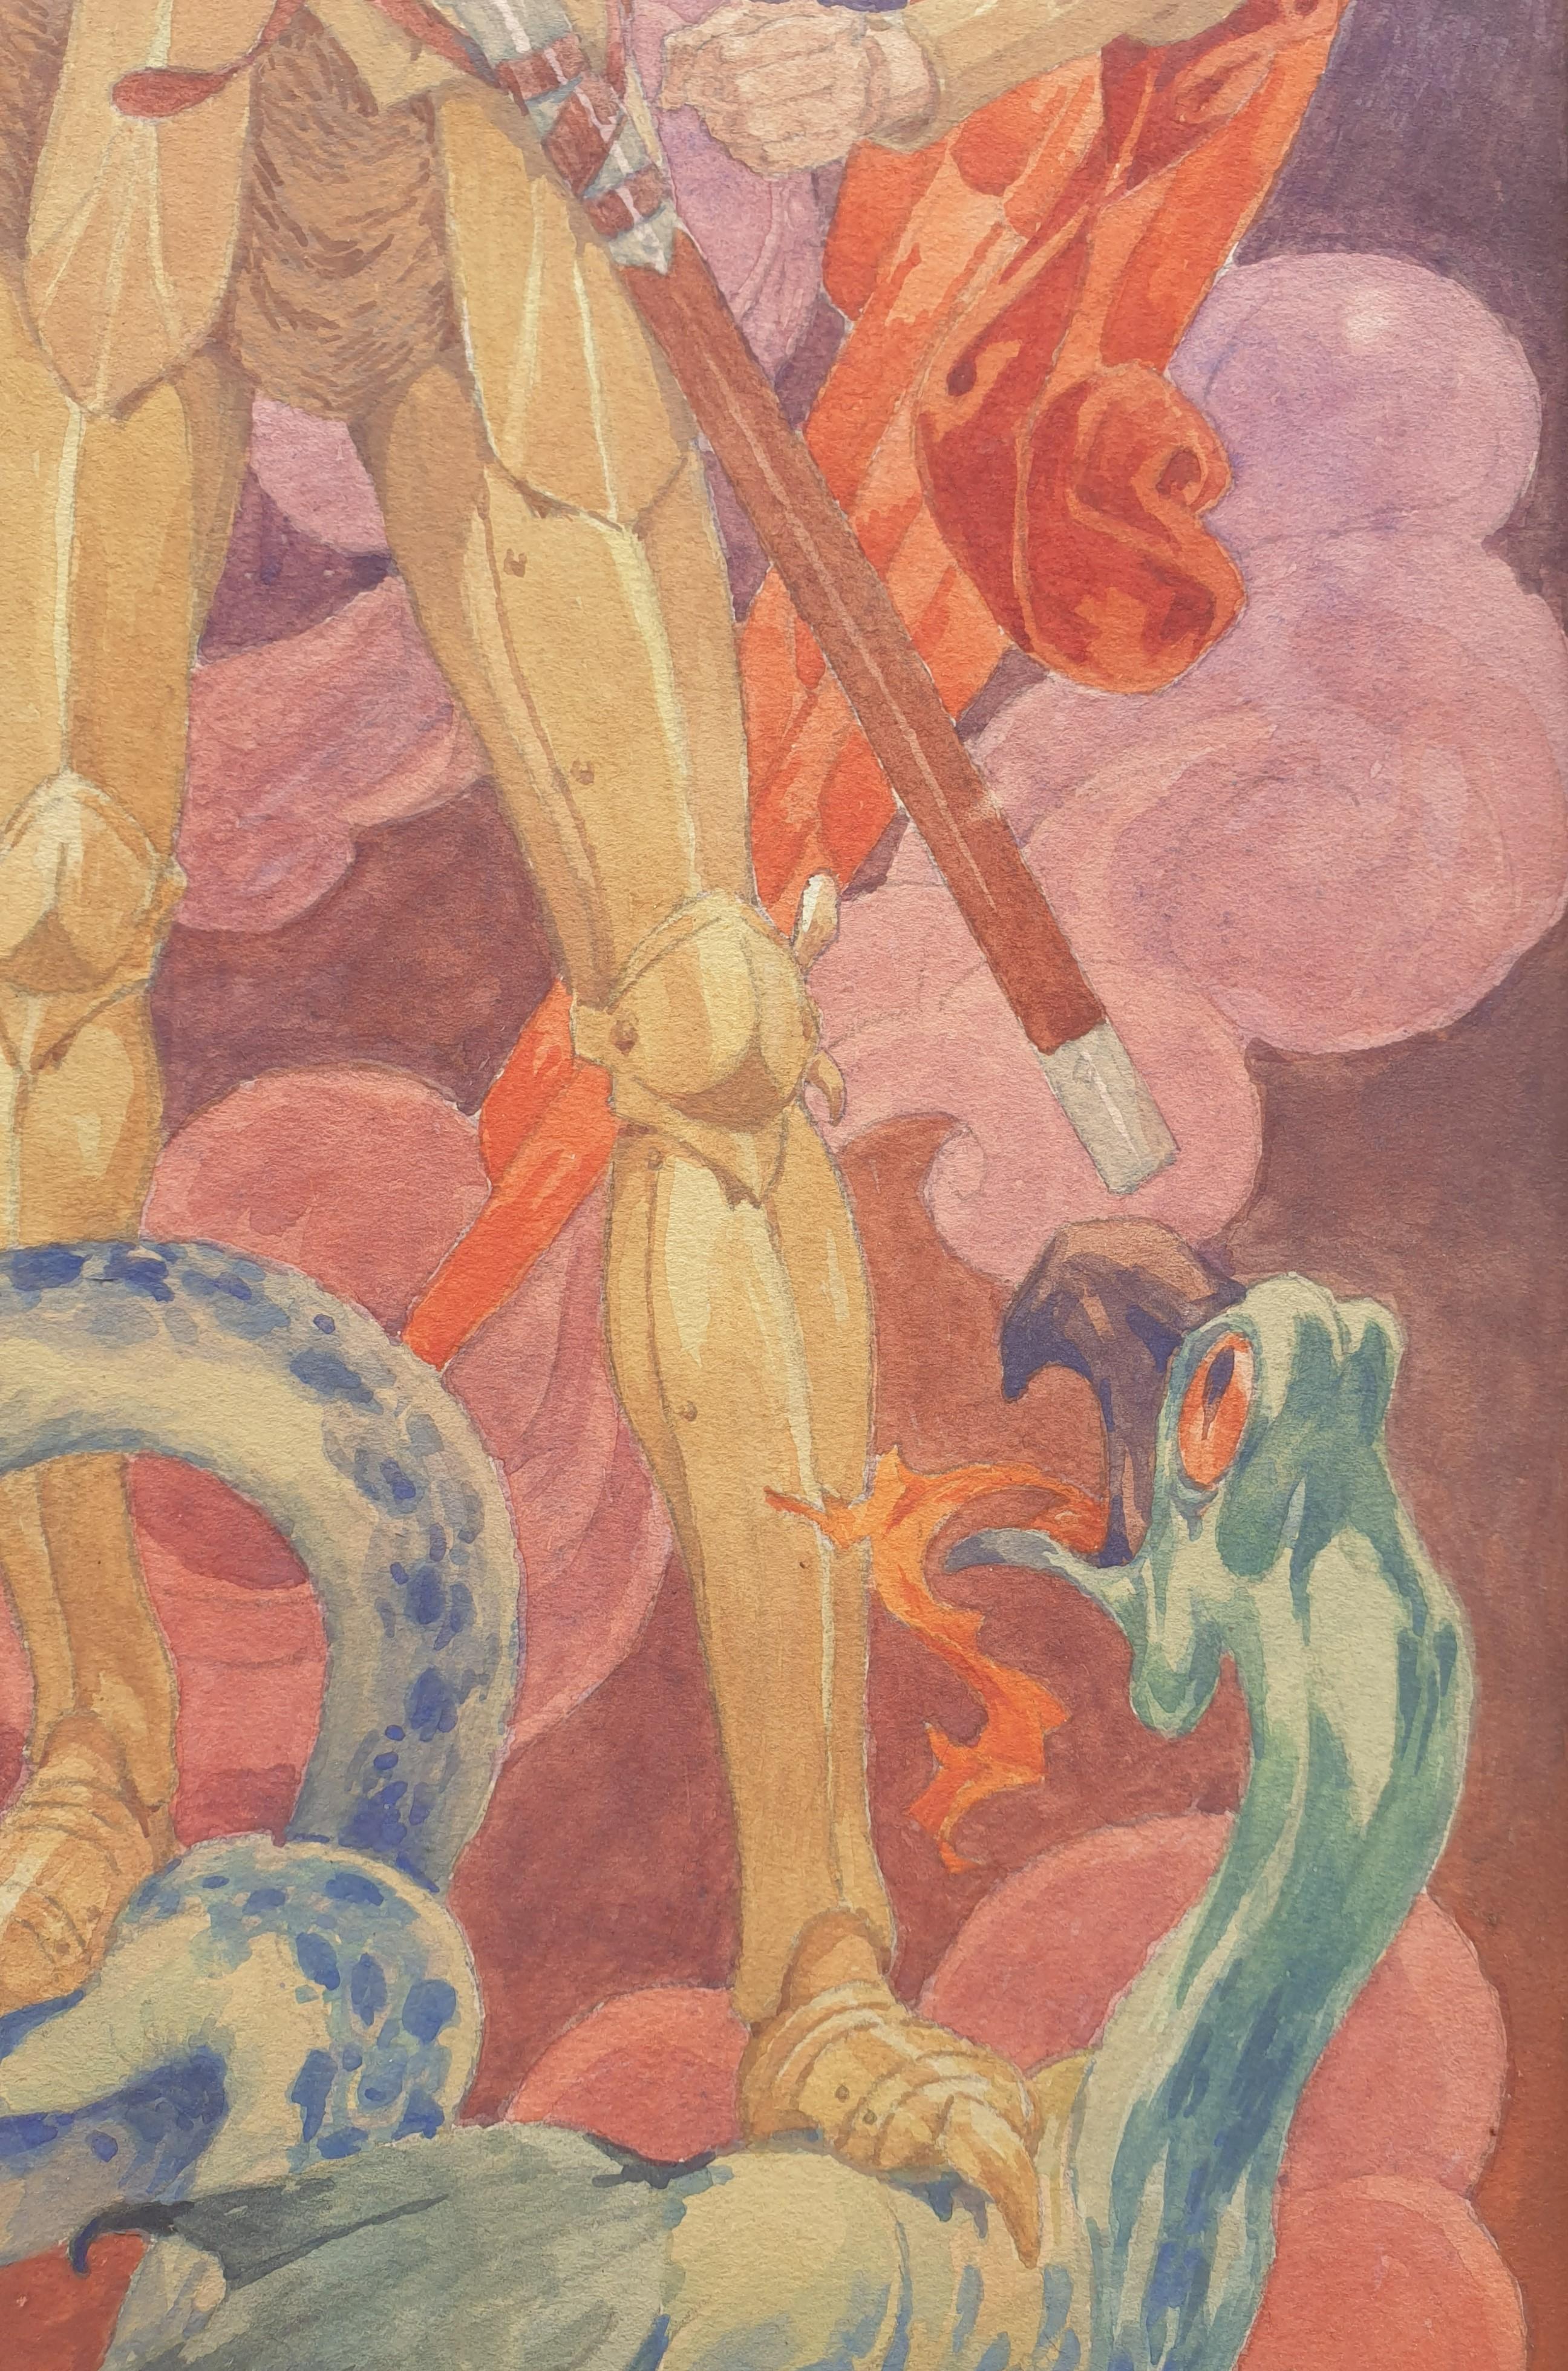 Watercolor 20th Decorative French Saint Michael slaying the dragon - Art Nouveau Art by Henry MORIN